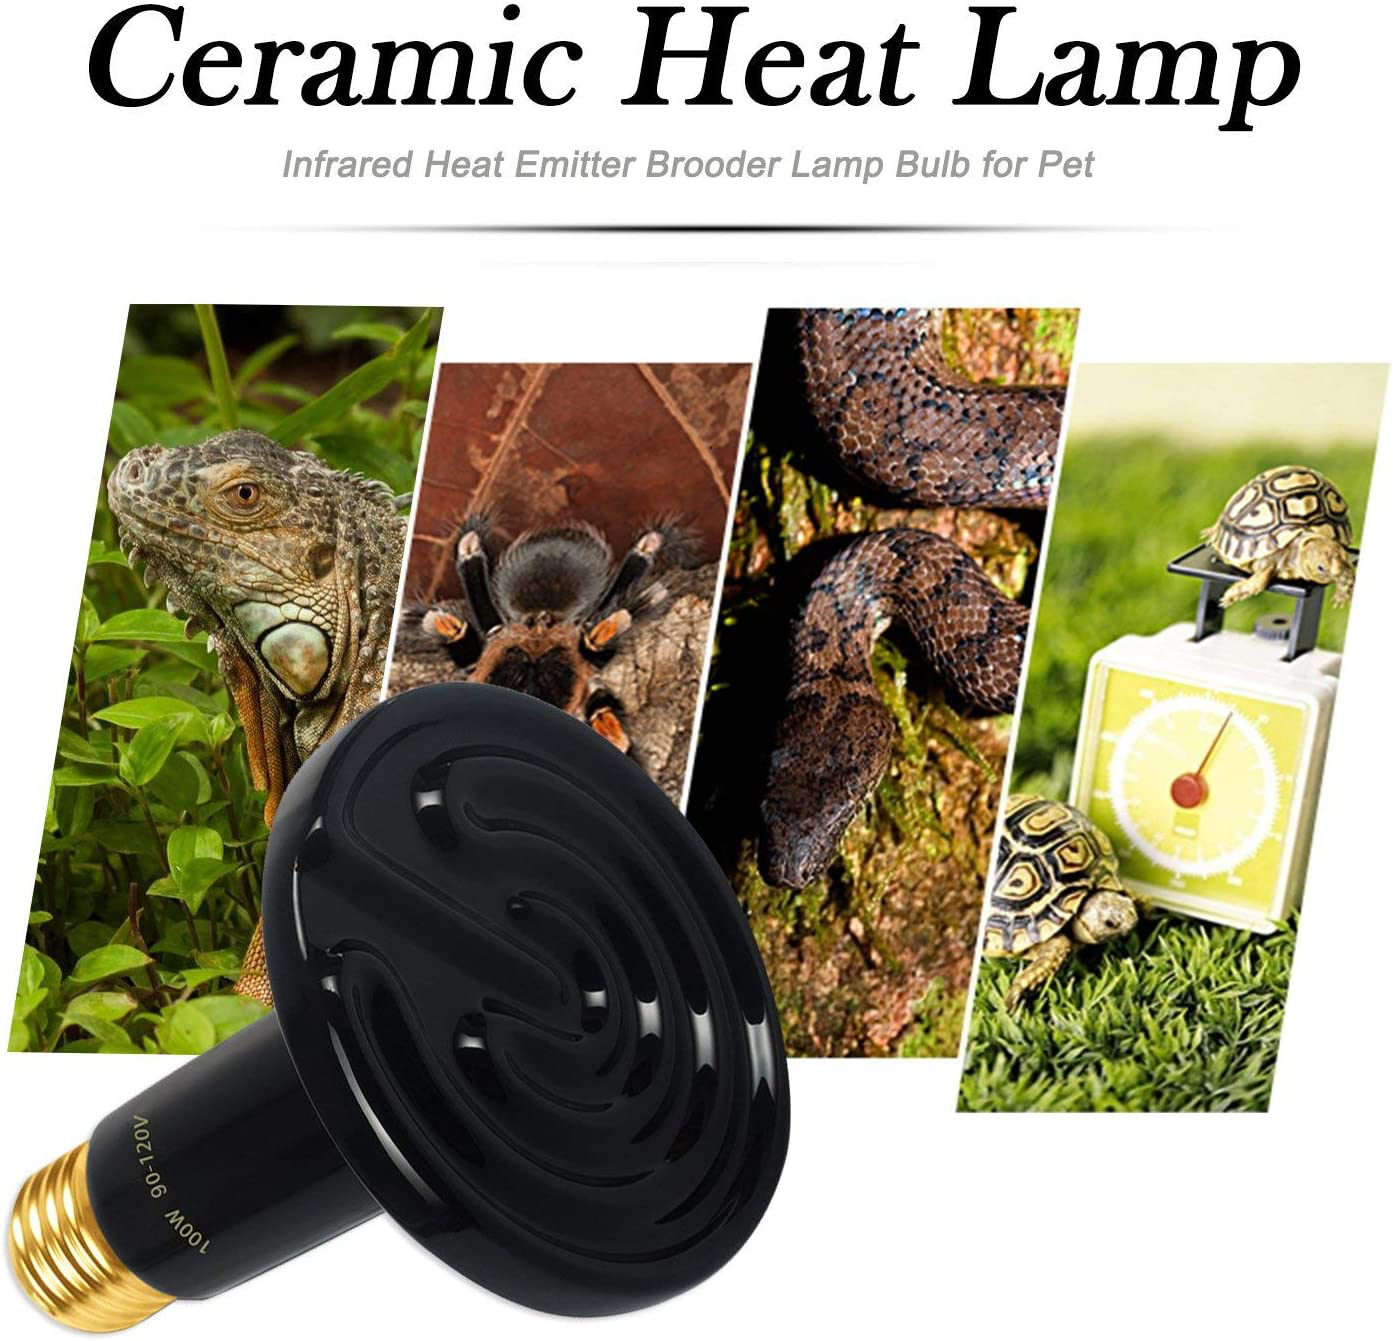 OMAYKEY 100W 2 Pack Ceramic Heat Lamp with 1-Pcs Digital-Thermometer, Infrared Reptile Heat Emitter Heater Lamp Bulbs for Pet Brooder Coop Chicken Lizard Snake Aquarium, No Light No Harm (ETL Listed) Animals & Pet Supplies > Pet Supplies > Reptile & Amphibian Supplies > Reptile & Amphibian Habitat Heating & Lighting OMAYKEY   